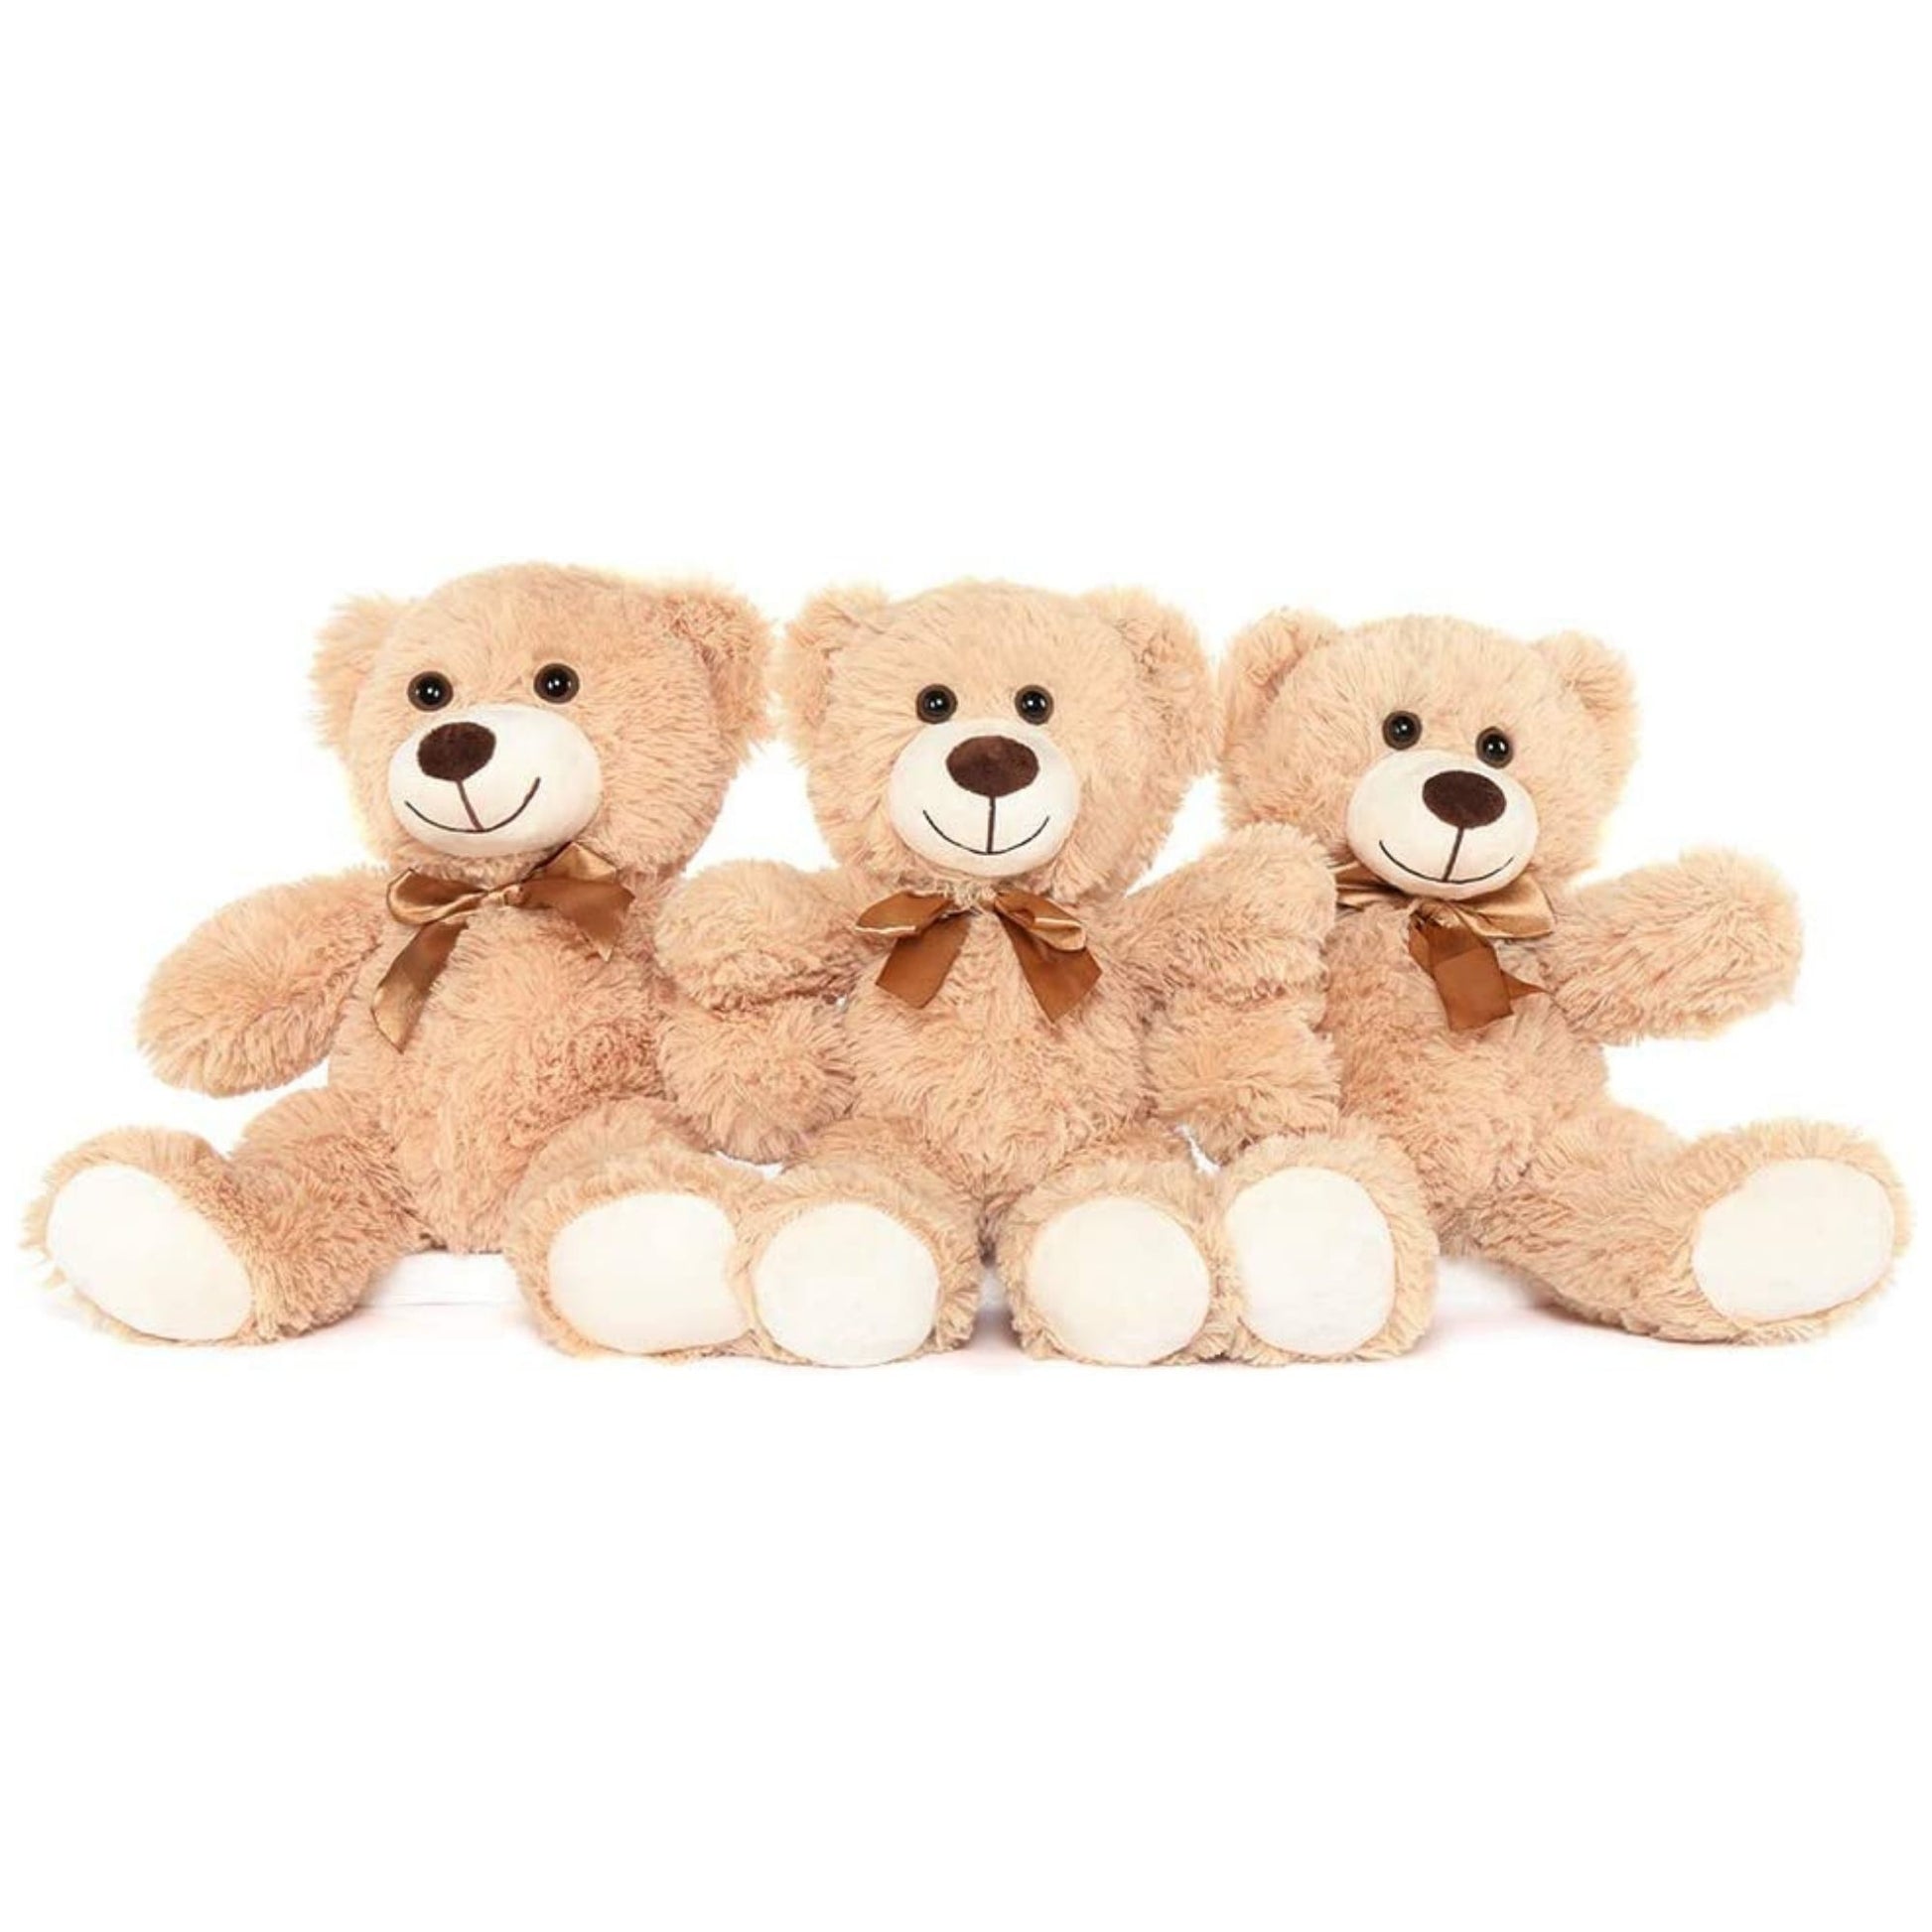 Small Teddy Bear Plush Toys, Light Brown, 13.8 Inches